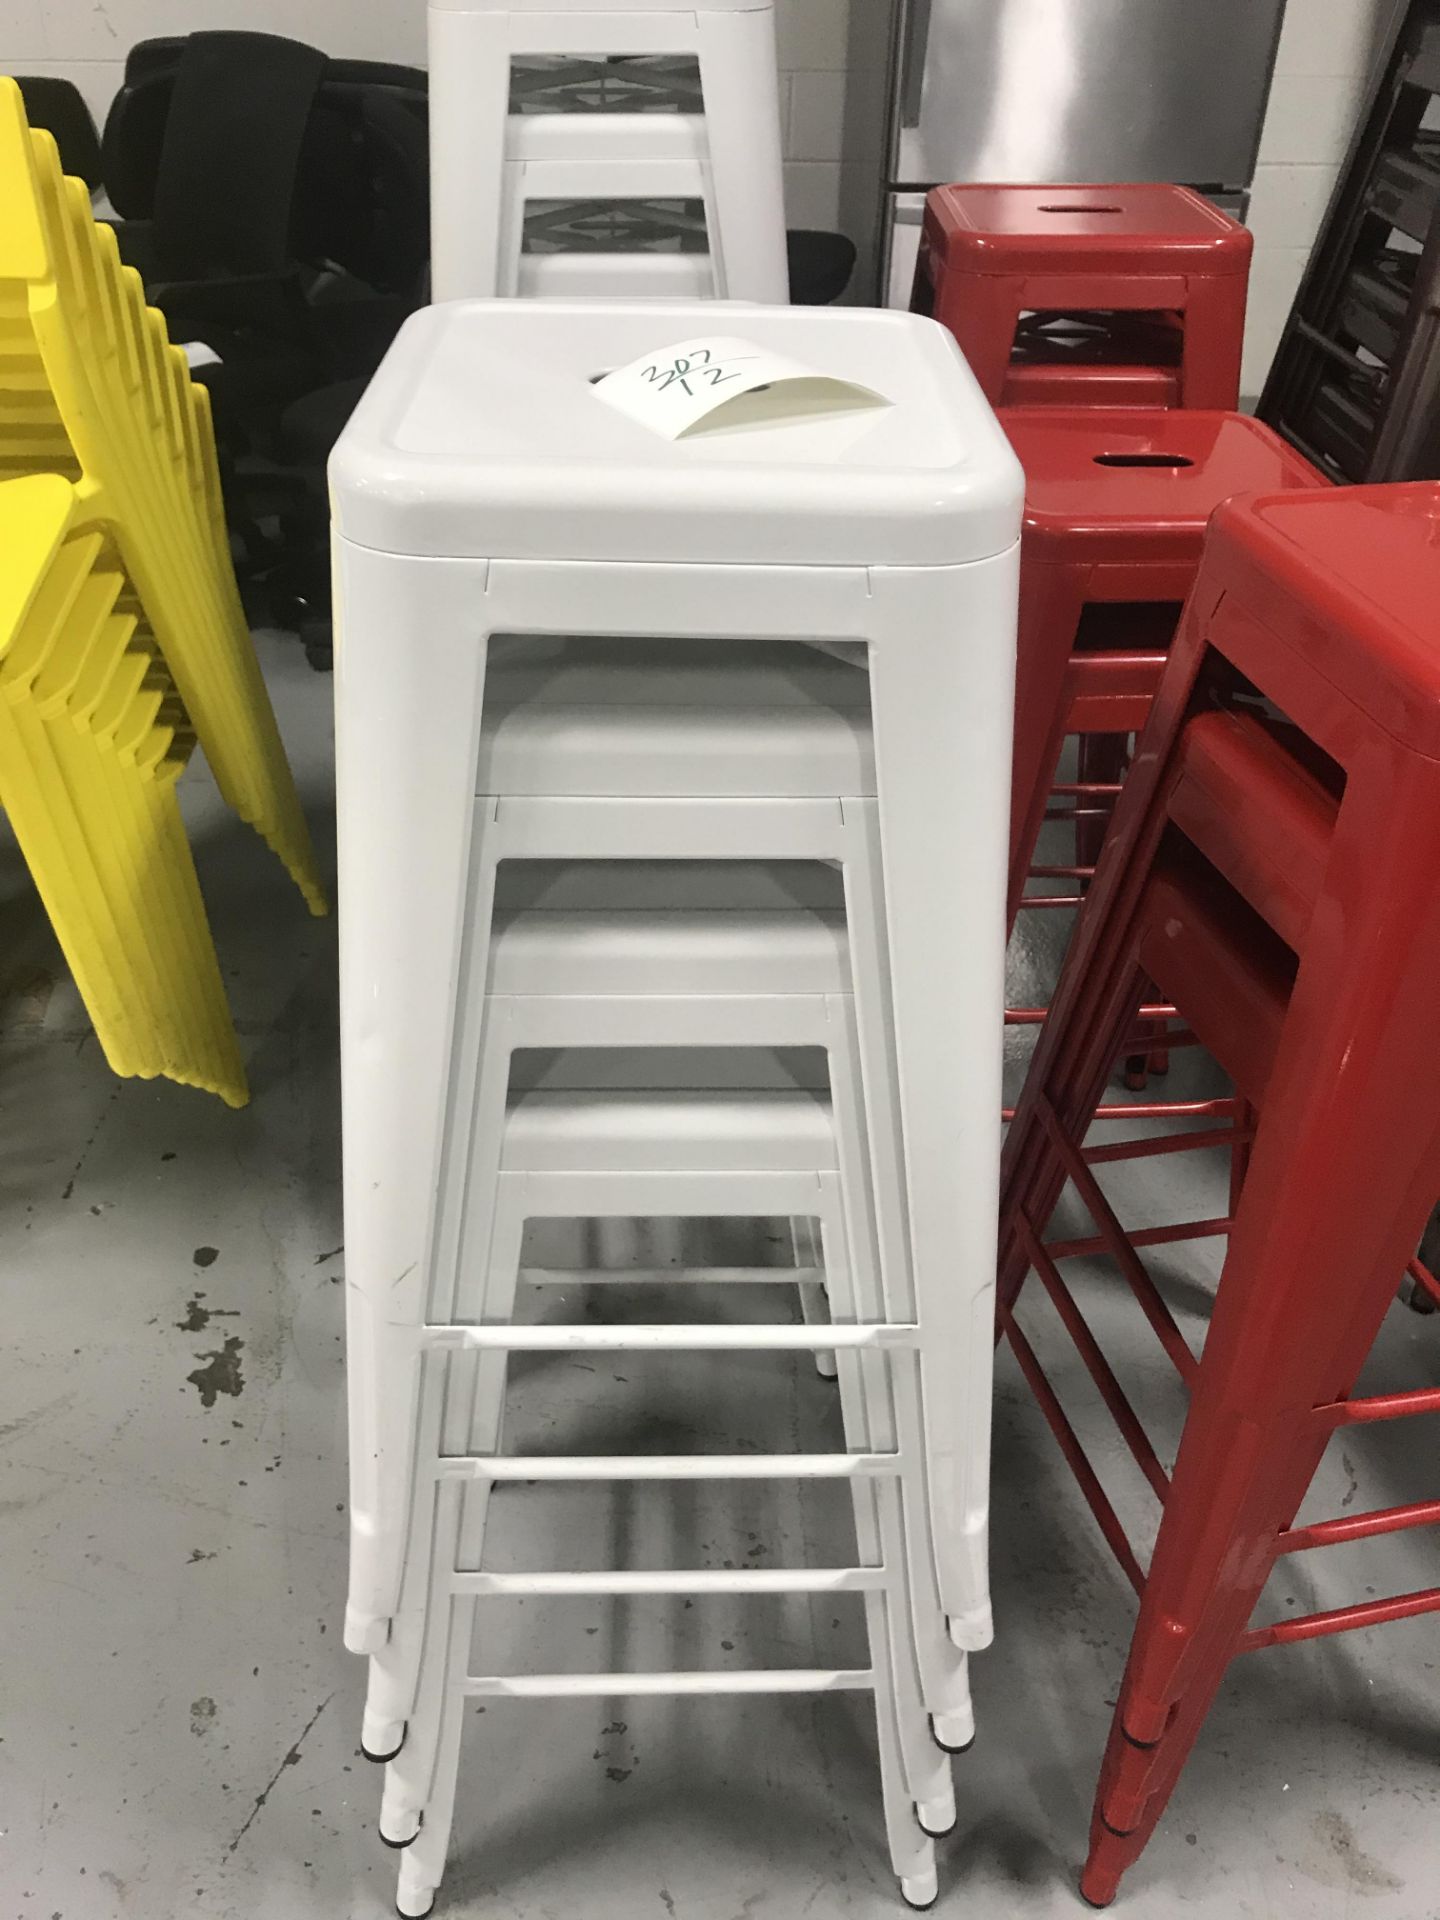 (12) Matching Metal Stools 27'H - White in Color